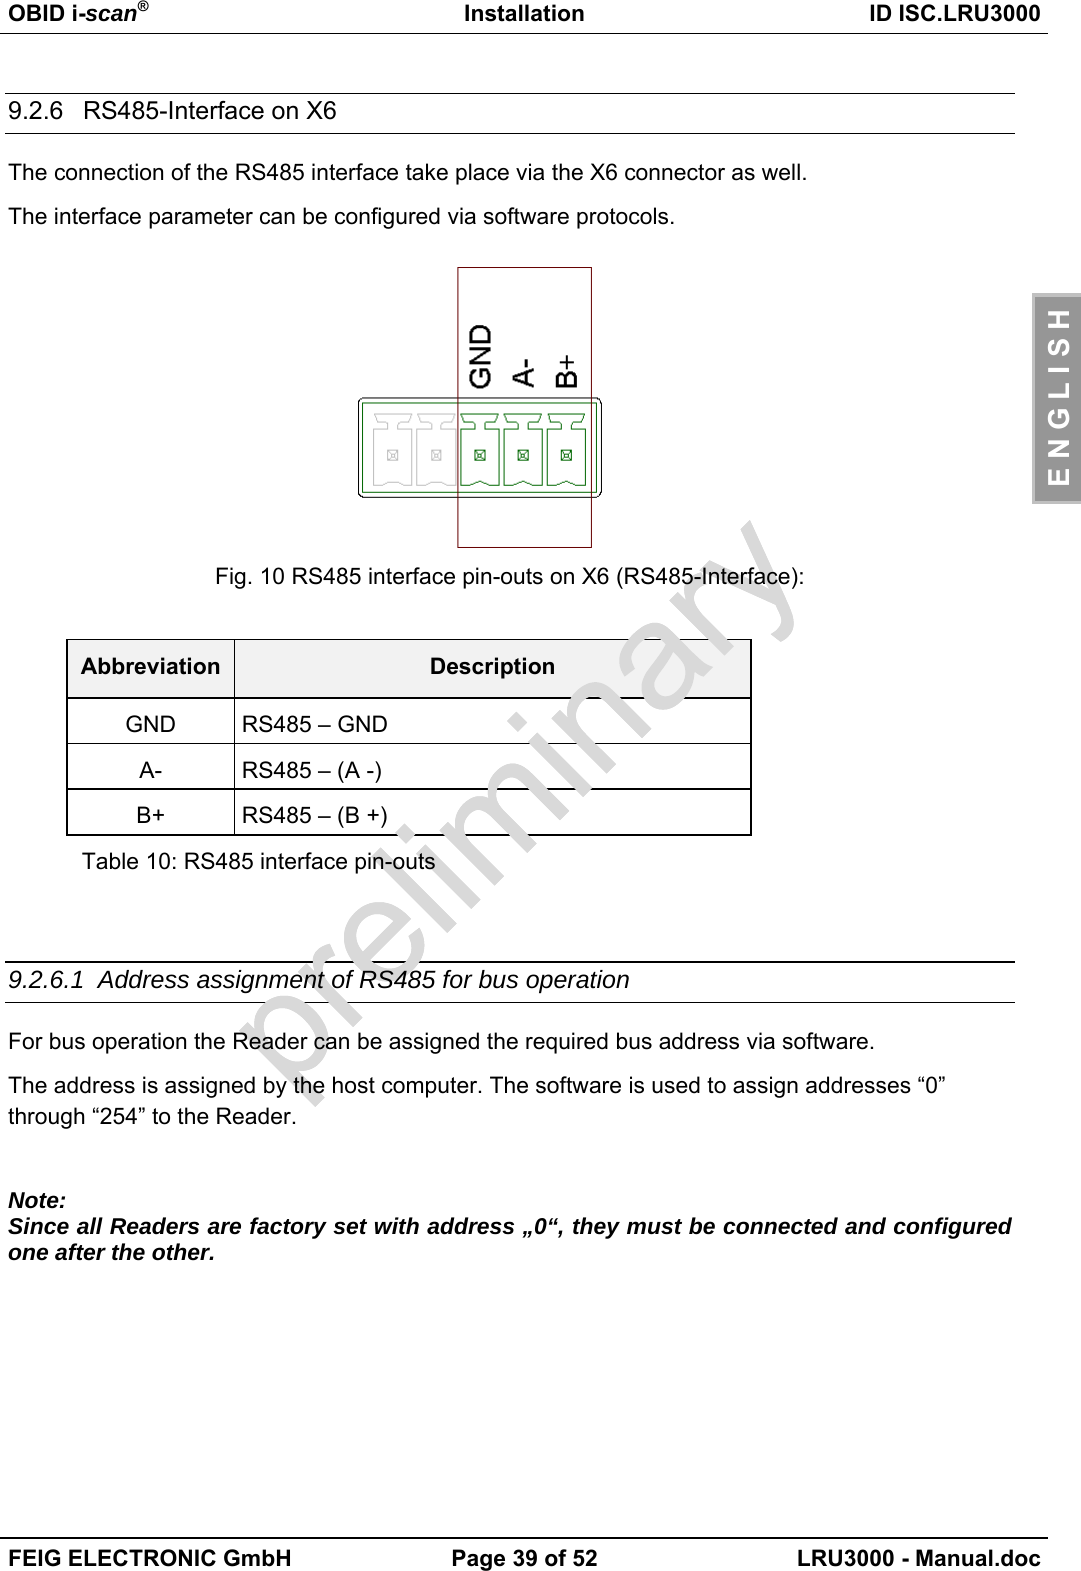 OBID i-scan®Installation ID ISC.LRU3000FEIG ELECTRONIC GmbH Page 39 of 52 LRU3000 - Manual.docE N G L I S H9.2.6 RS485-Interface on X6The connection of the RS485 interface take place via the X6 connector as well.The interface parameter can be configured via software protocols.Fig. 10 RS485 interface pin-outs on X6 (RS485-Interface):Abbreviation DescriptionGND RS485 – GNDA- RS485 – (A -)B+ RS485 – (B +)Table 10: RS485 interface pin-outs9.2.6.1 Address assignment of RS485 for bus operationFor bus operation the Reader can be assigned the required bus address via software.The address is assigned by the host computer. The software is used to assign addresses “0”through “254” to the Reader.Note:Since all Readers are factory set with address „0“, they must be connected and configuredone after the other.